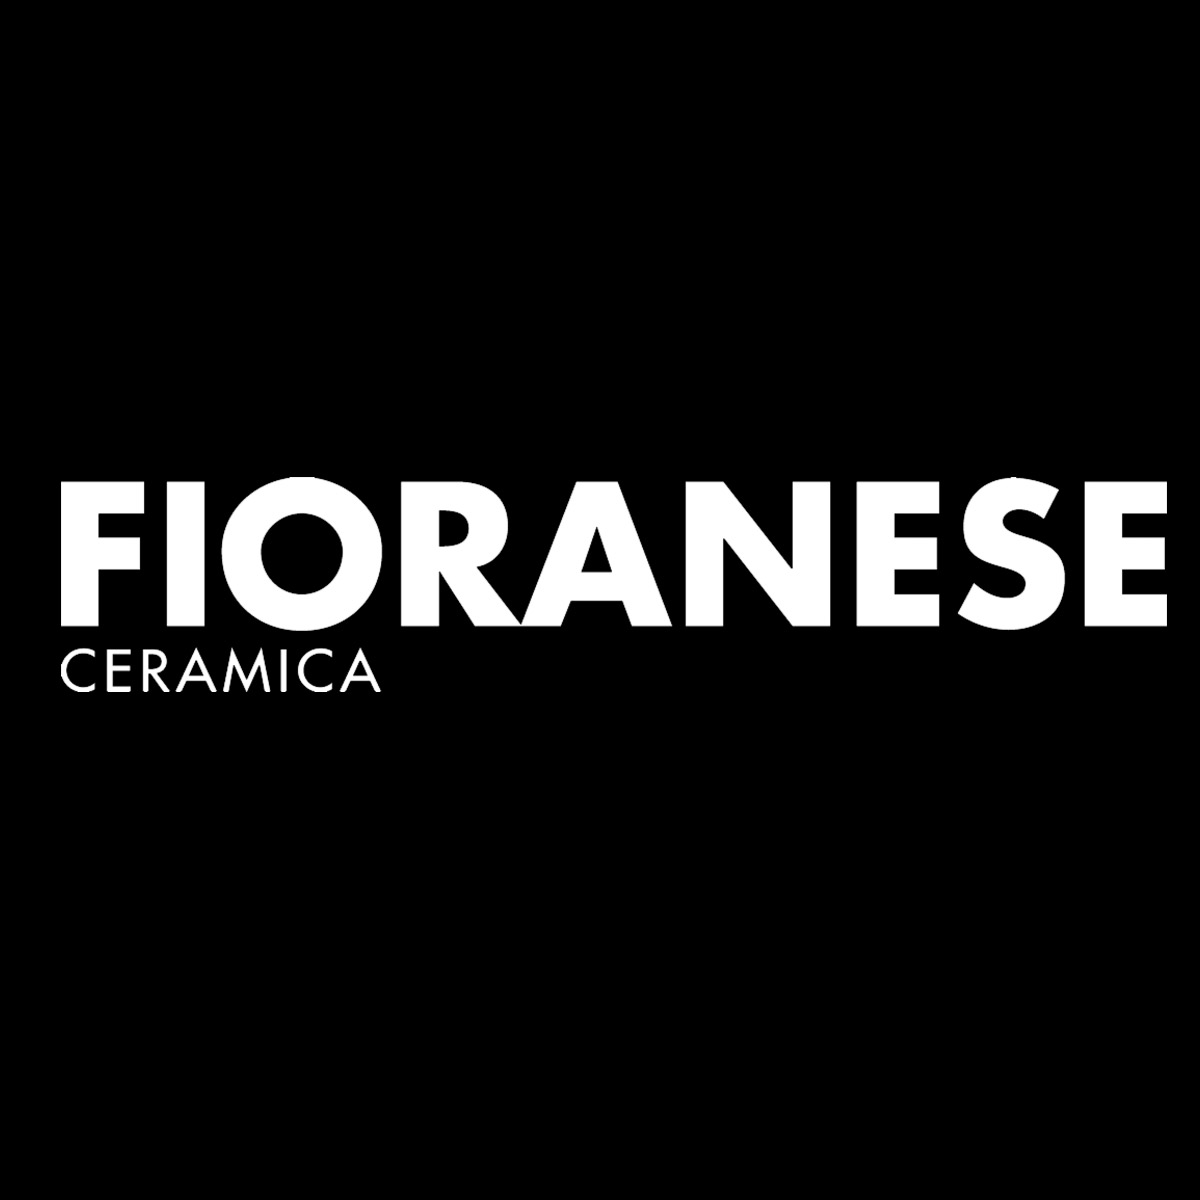 Ceramica Fioranese: 13 Products & 2 Projects by 2 Firms